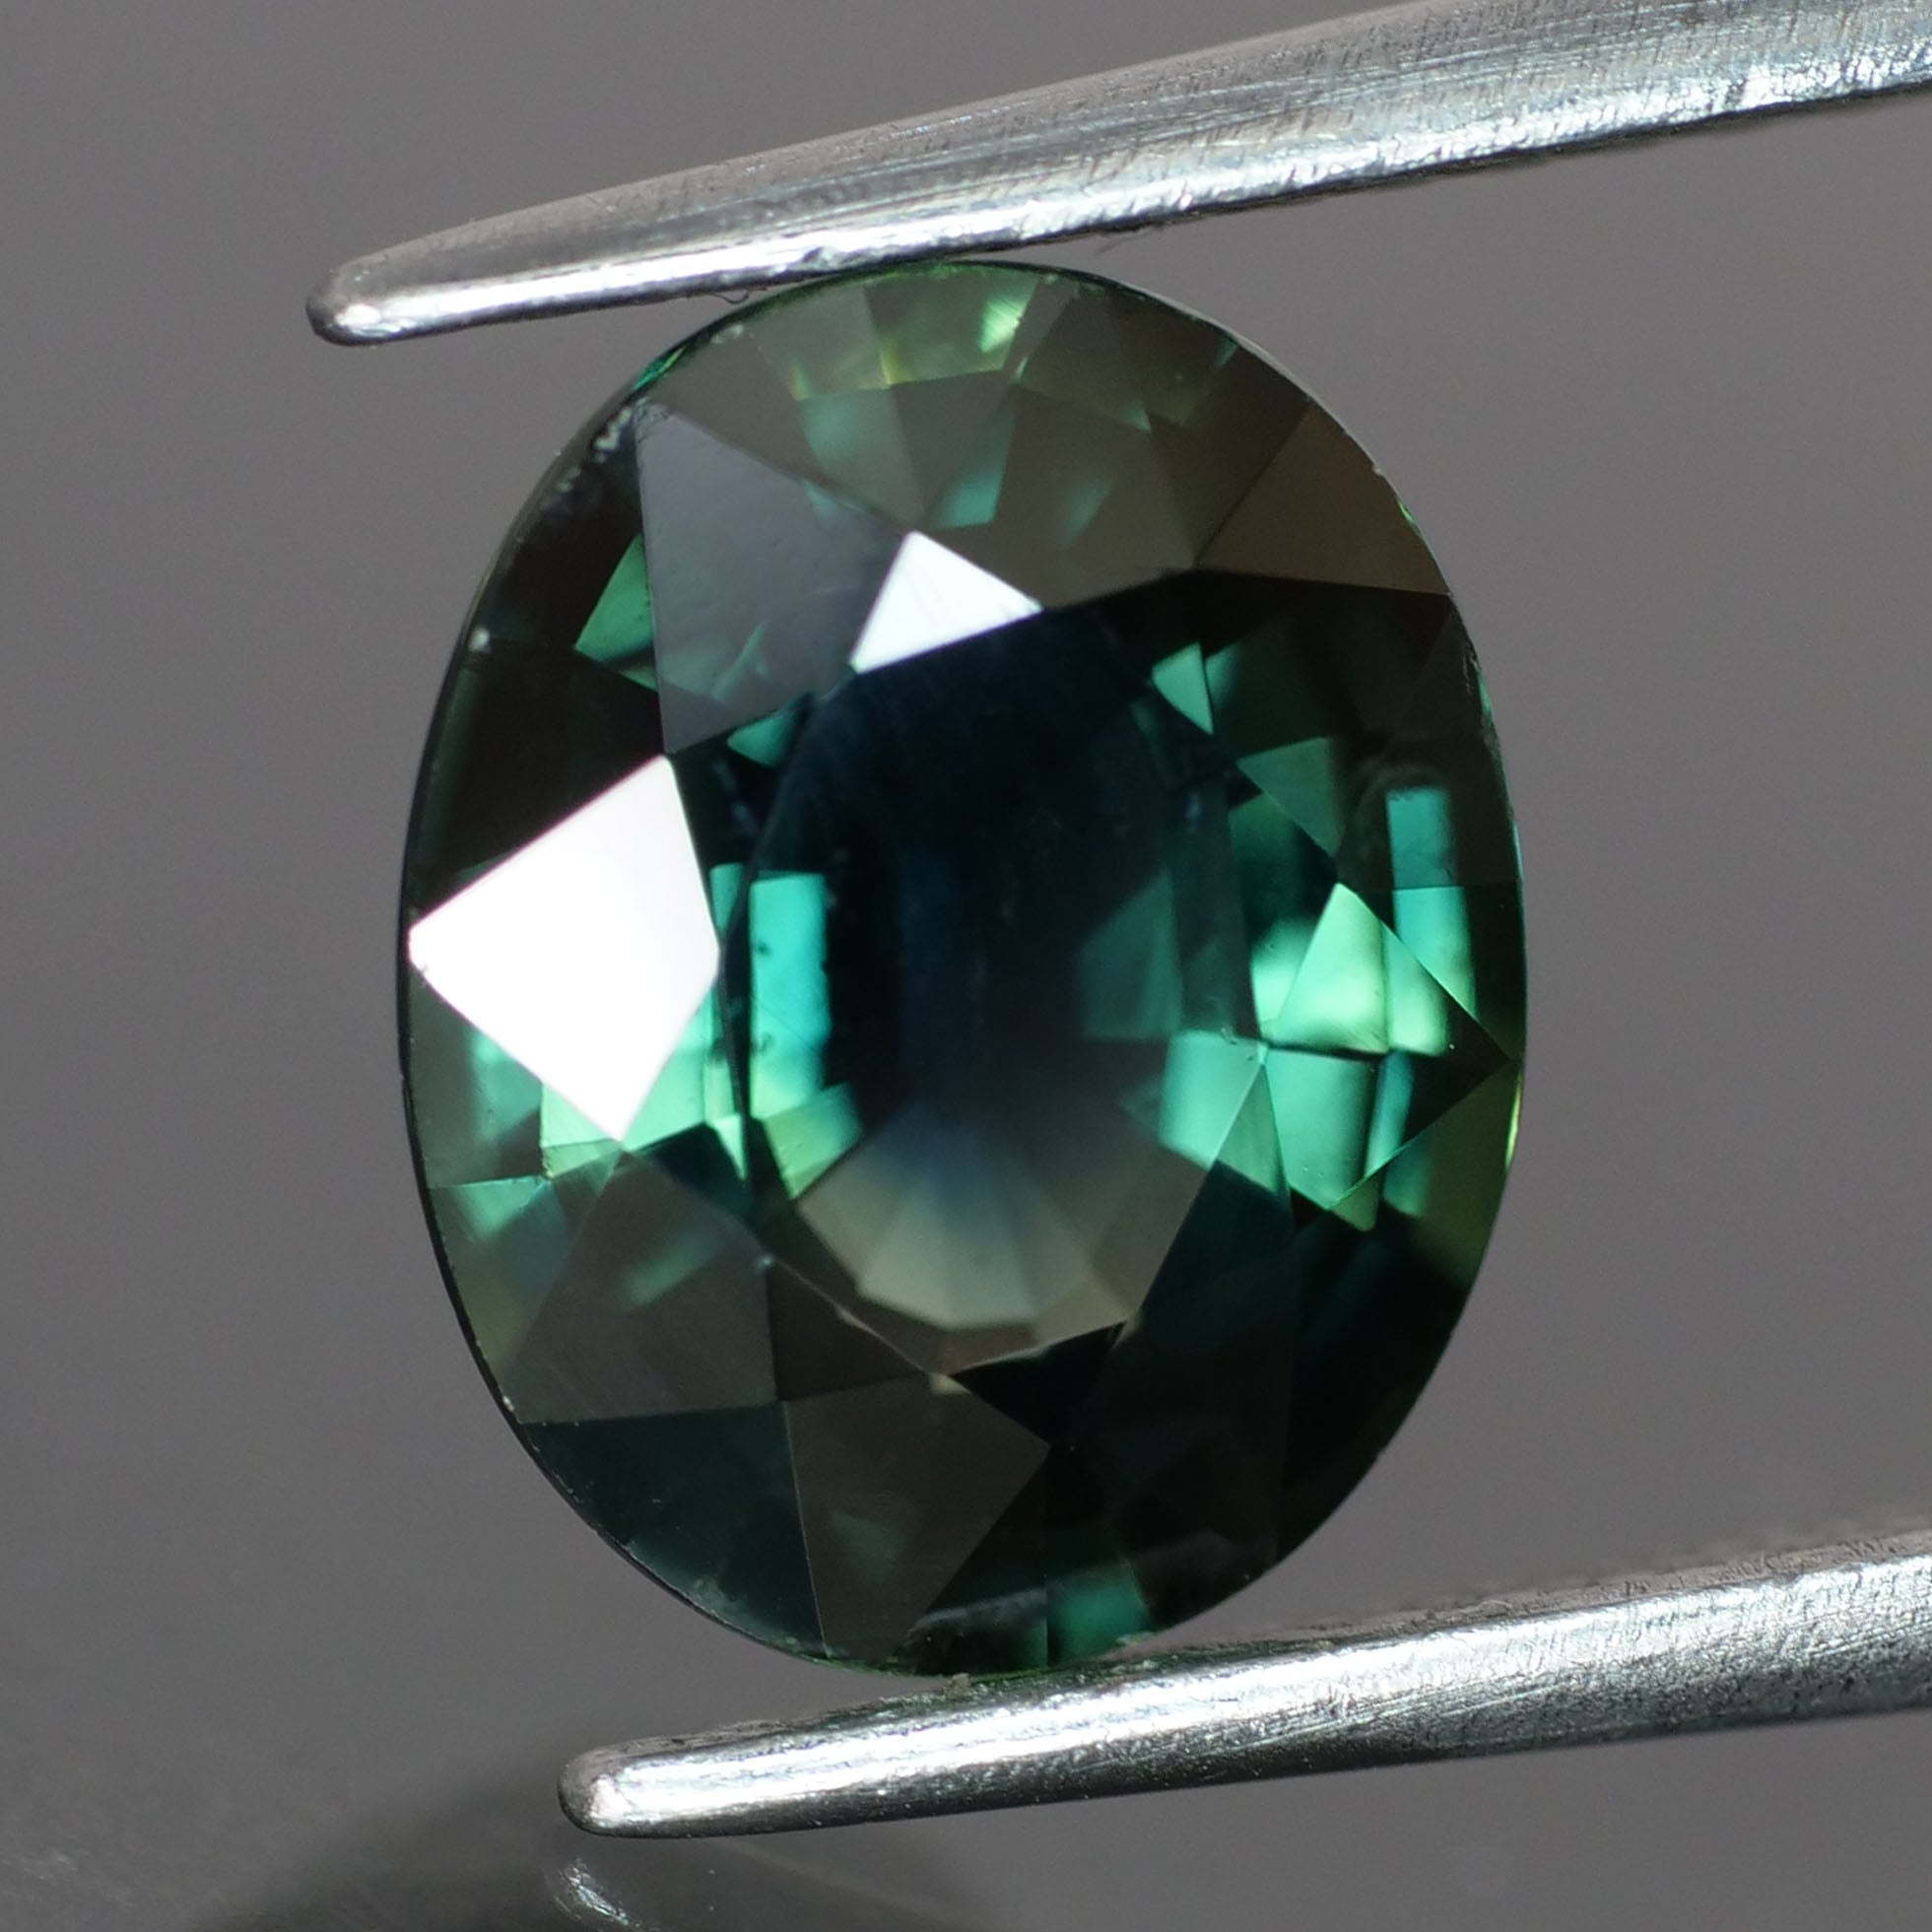 Sapphire | natural, teal color, oval cut *9.5x7.5 mm, 2.9ct - Eden Garden Jewelry™